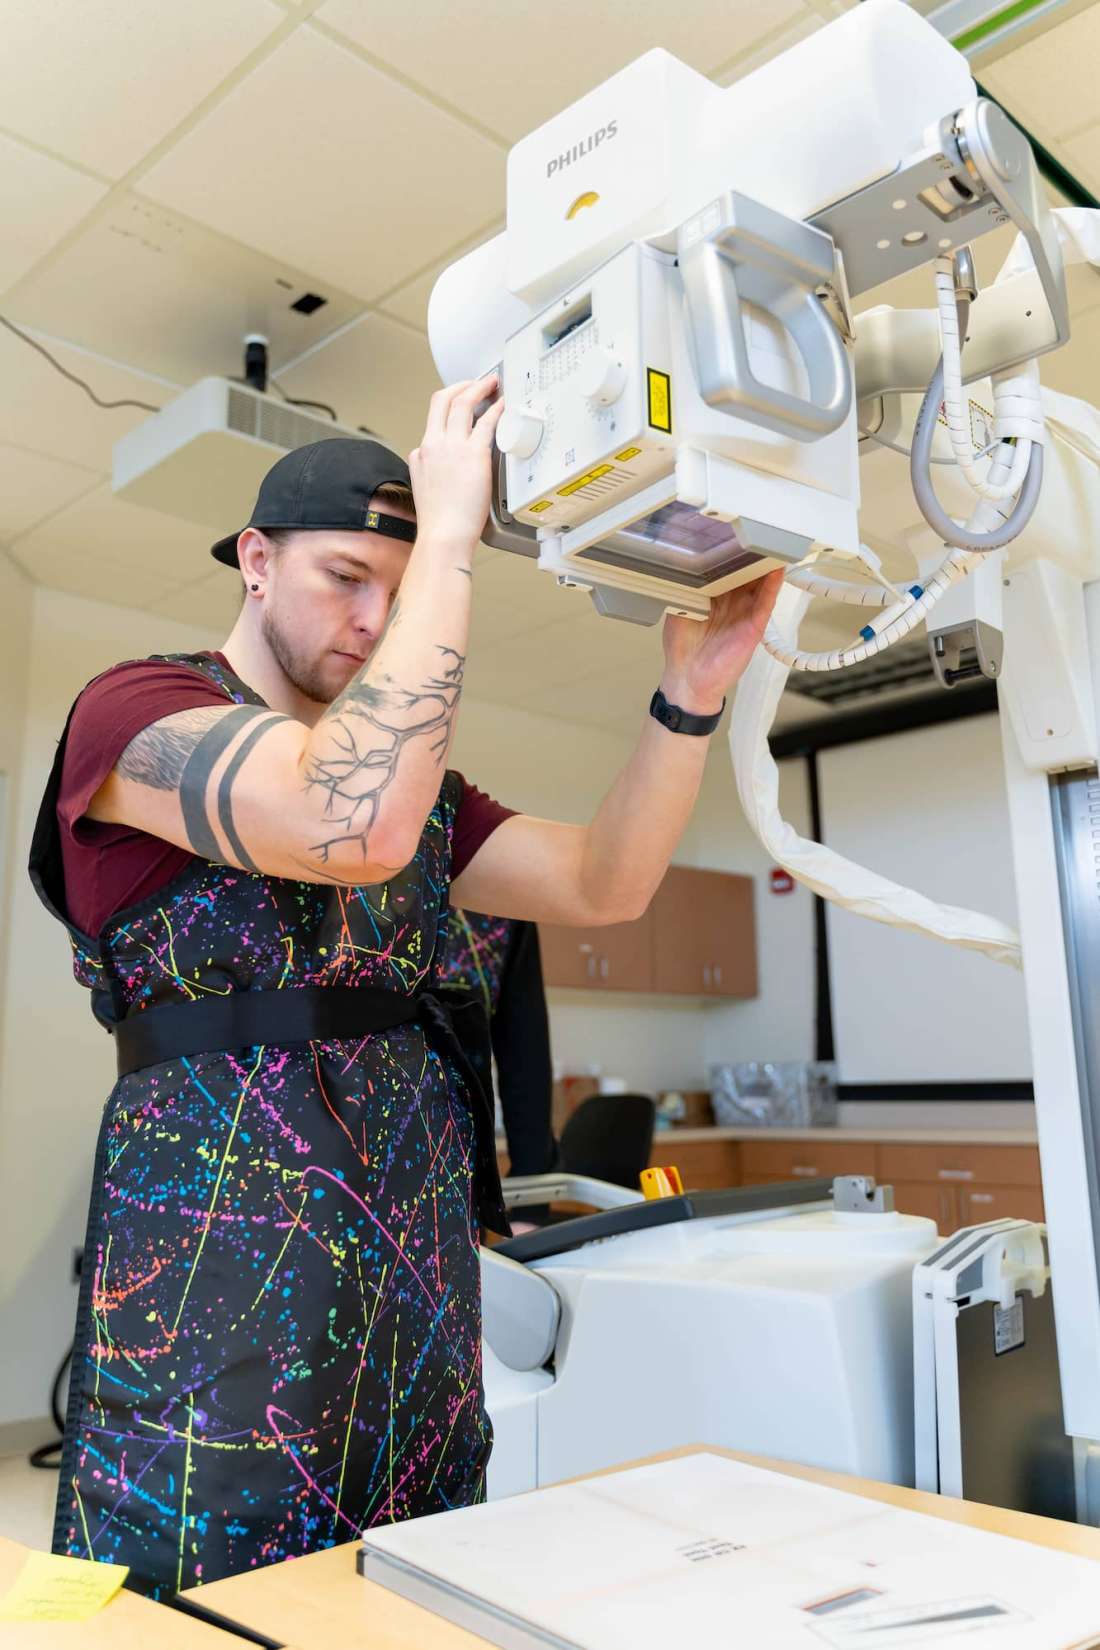 A student wearing a lead apron practices aligning the radiography system over the center of a paper target.